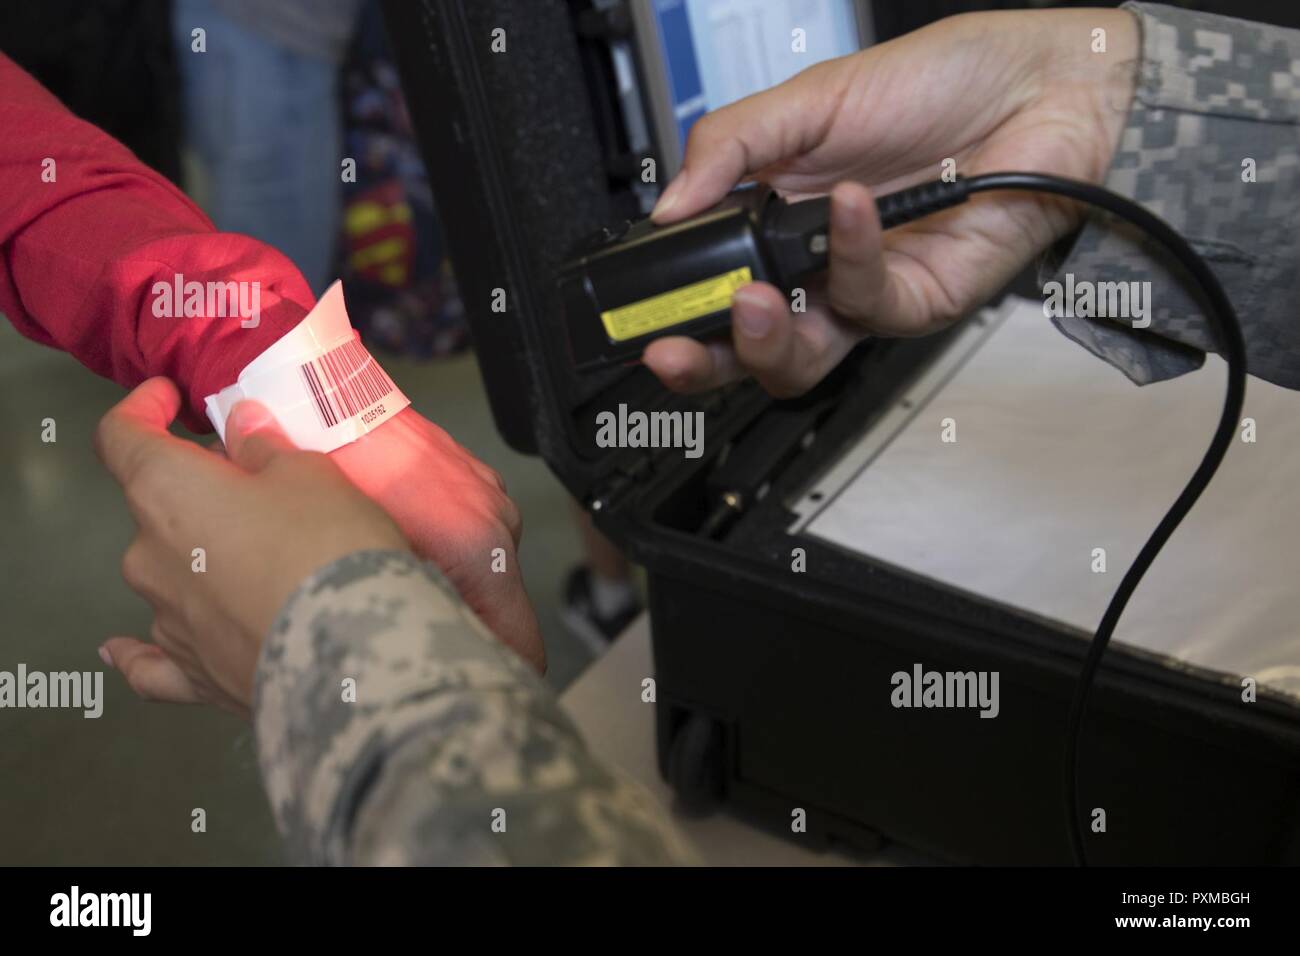 U.S. Army Specialist Brianna Doo, U.S. Army in Japan band, scans a bracelet with a Noncombatant Evacuation Operations tracking system (NTS) barcode at Yokota Air Base, Japan, during noncombatant evacuation exercise Focused Passage 2017. Eighth Army conducts NEO administrative and training tasks designed to inspect NEO packets, conduct NEO representative/warden training, NTS operator training, and account for all Department of Defense noncombatants. Stock Photo